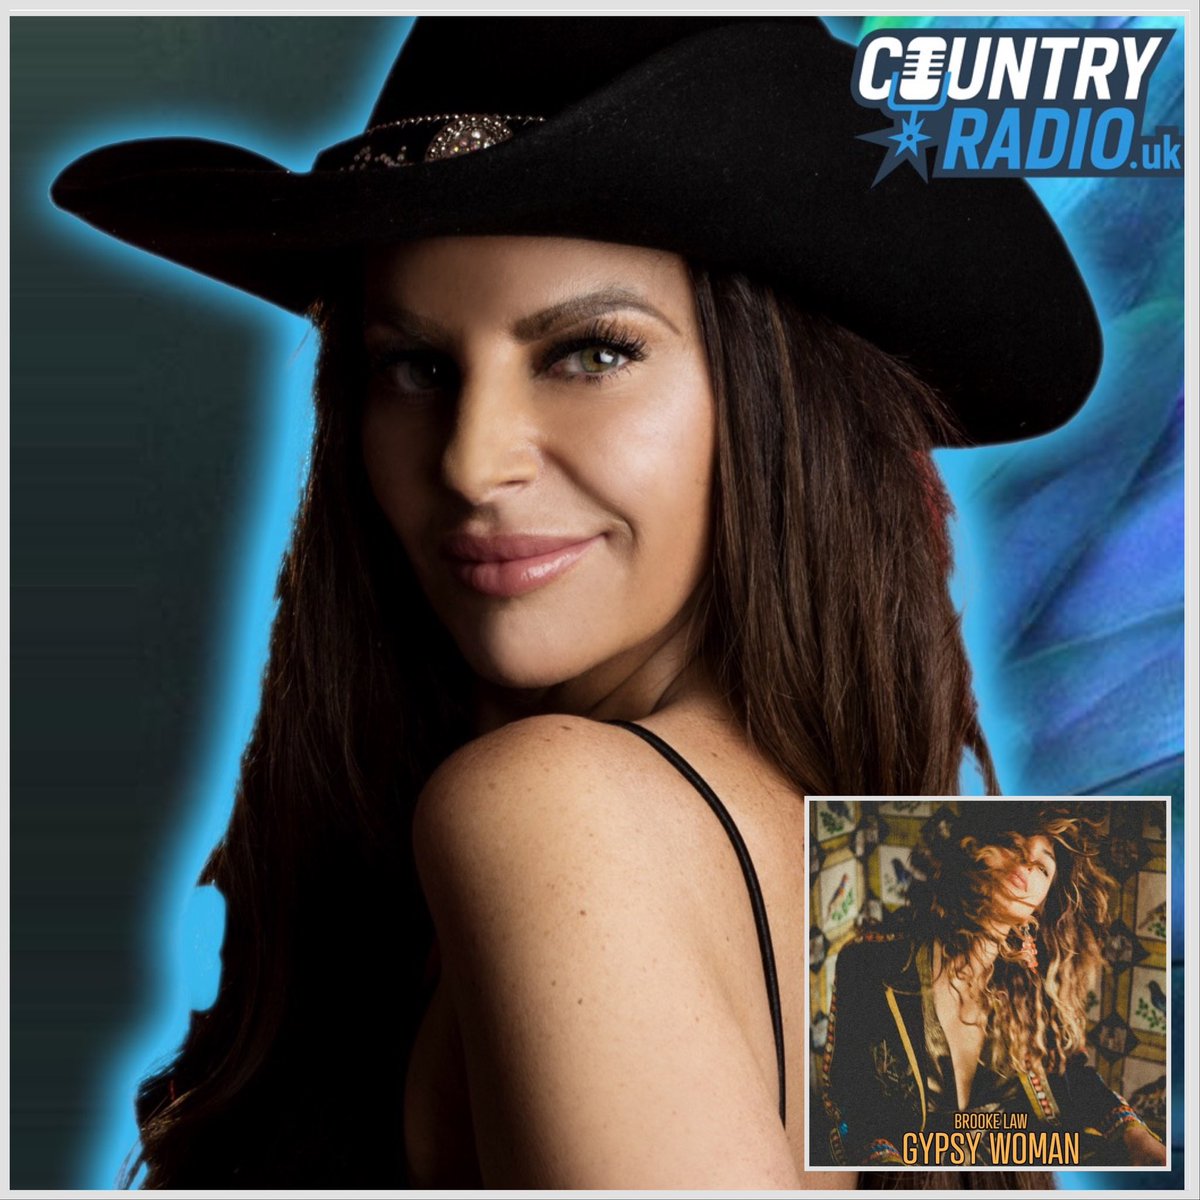 JESS T ON @countryradiouk 💙 LIVE TONIGHT AT 7pm GMT/2pm CDT 📻 countryradio.uk/schedule/jesst Listen online at countryradio.uk, on TuneIn/Just ask “Alexa, play the station Radio dot UK” or chat live on #mixcloud ✨ 🌎 WORLDWIDE FIRST AIRPLAY EXCLUSIVE for @BR00KELAW 🌎